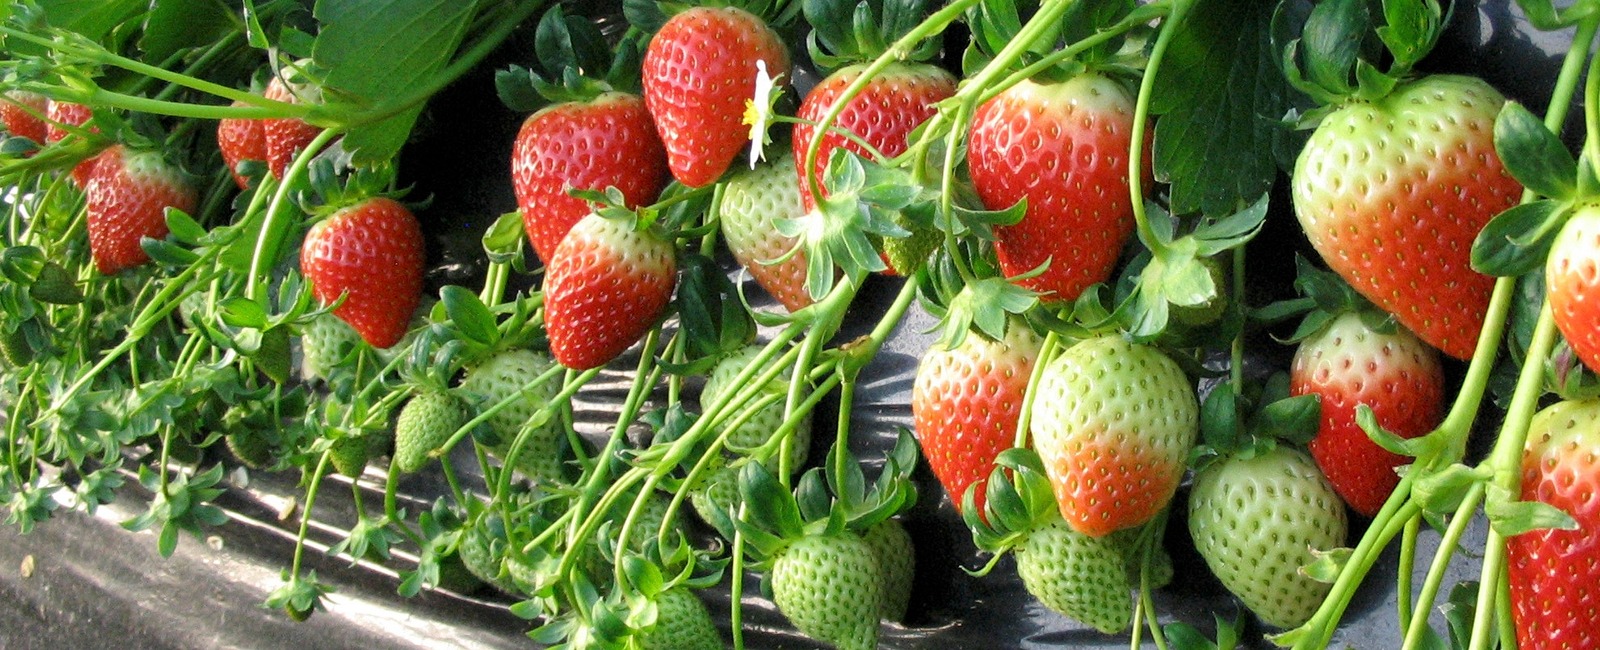 How to increase strawberry yield